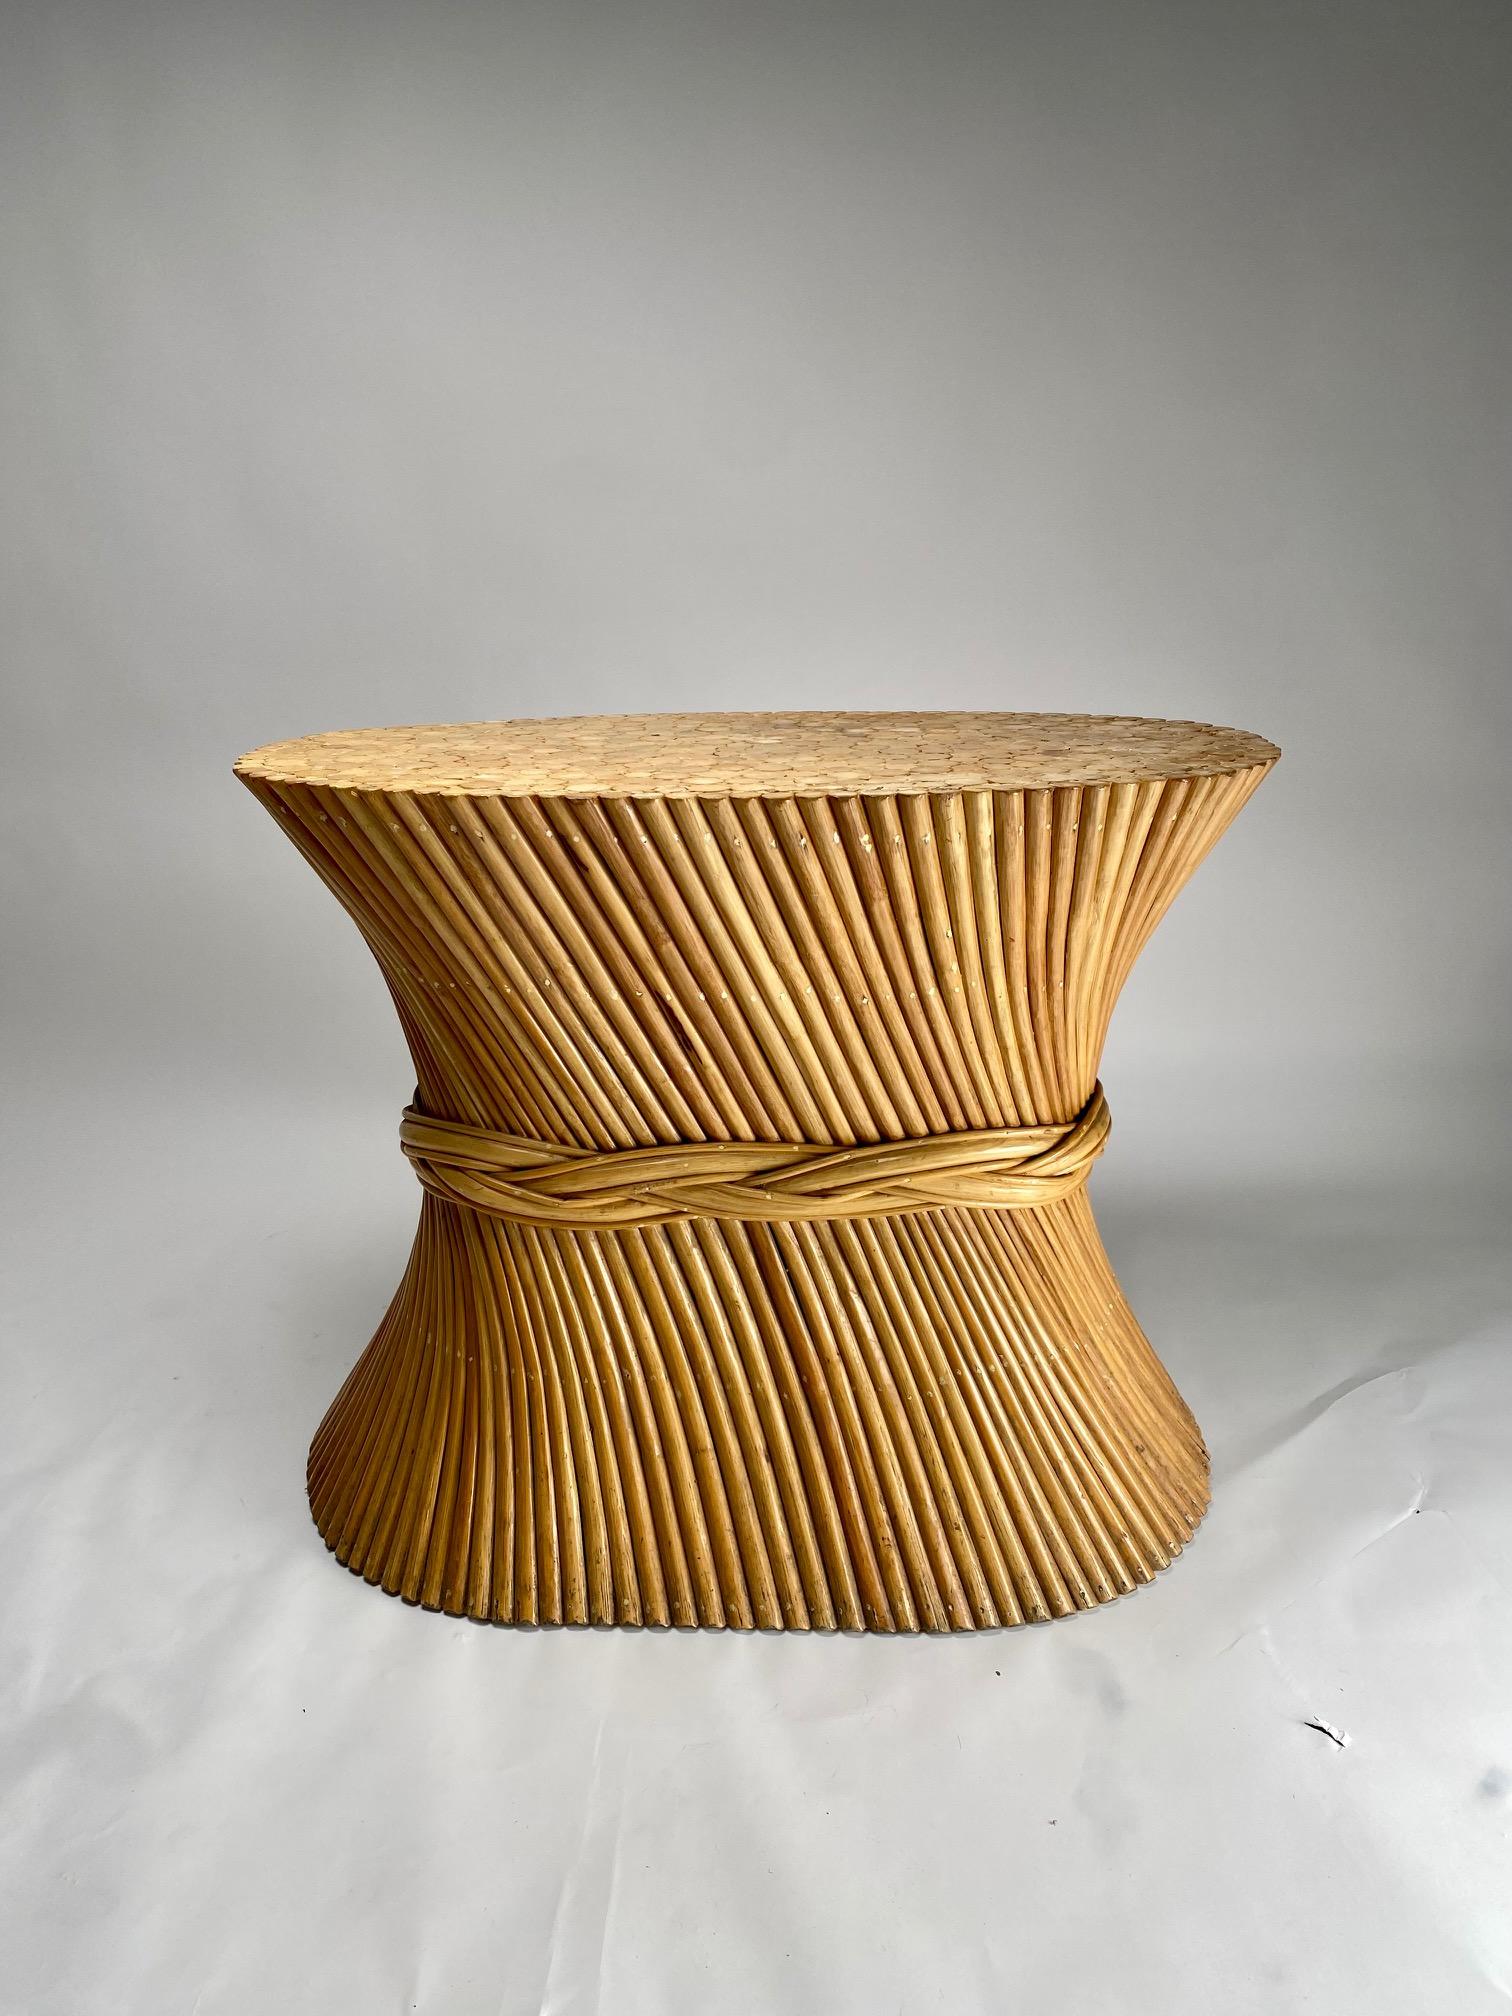 An elegant 1970s elliptical bamboo table made in the image of a wheat honeycomb, you can choose a round or oval shaped glass top. Vivai del Sud, Italy, 1970s